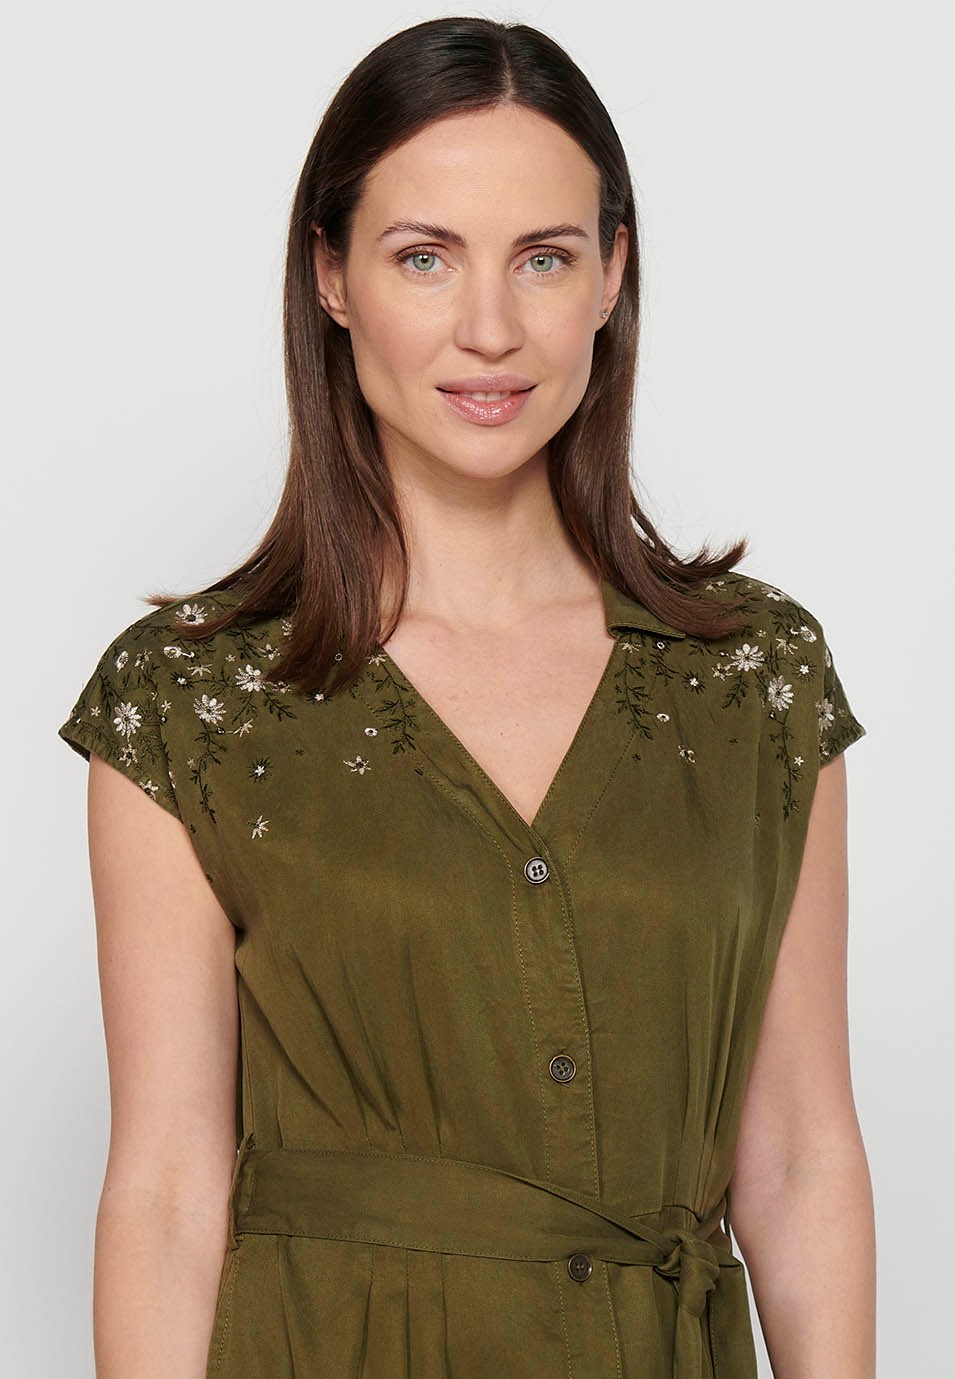 Short-sleeved midi dress with V-neckline and front button closure, fitted at the waist with embroidered details in Khaki color for Women 3